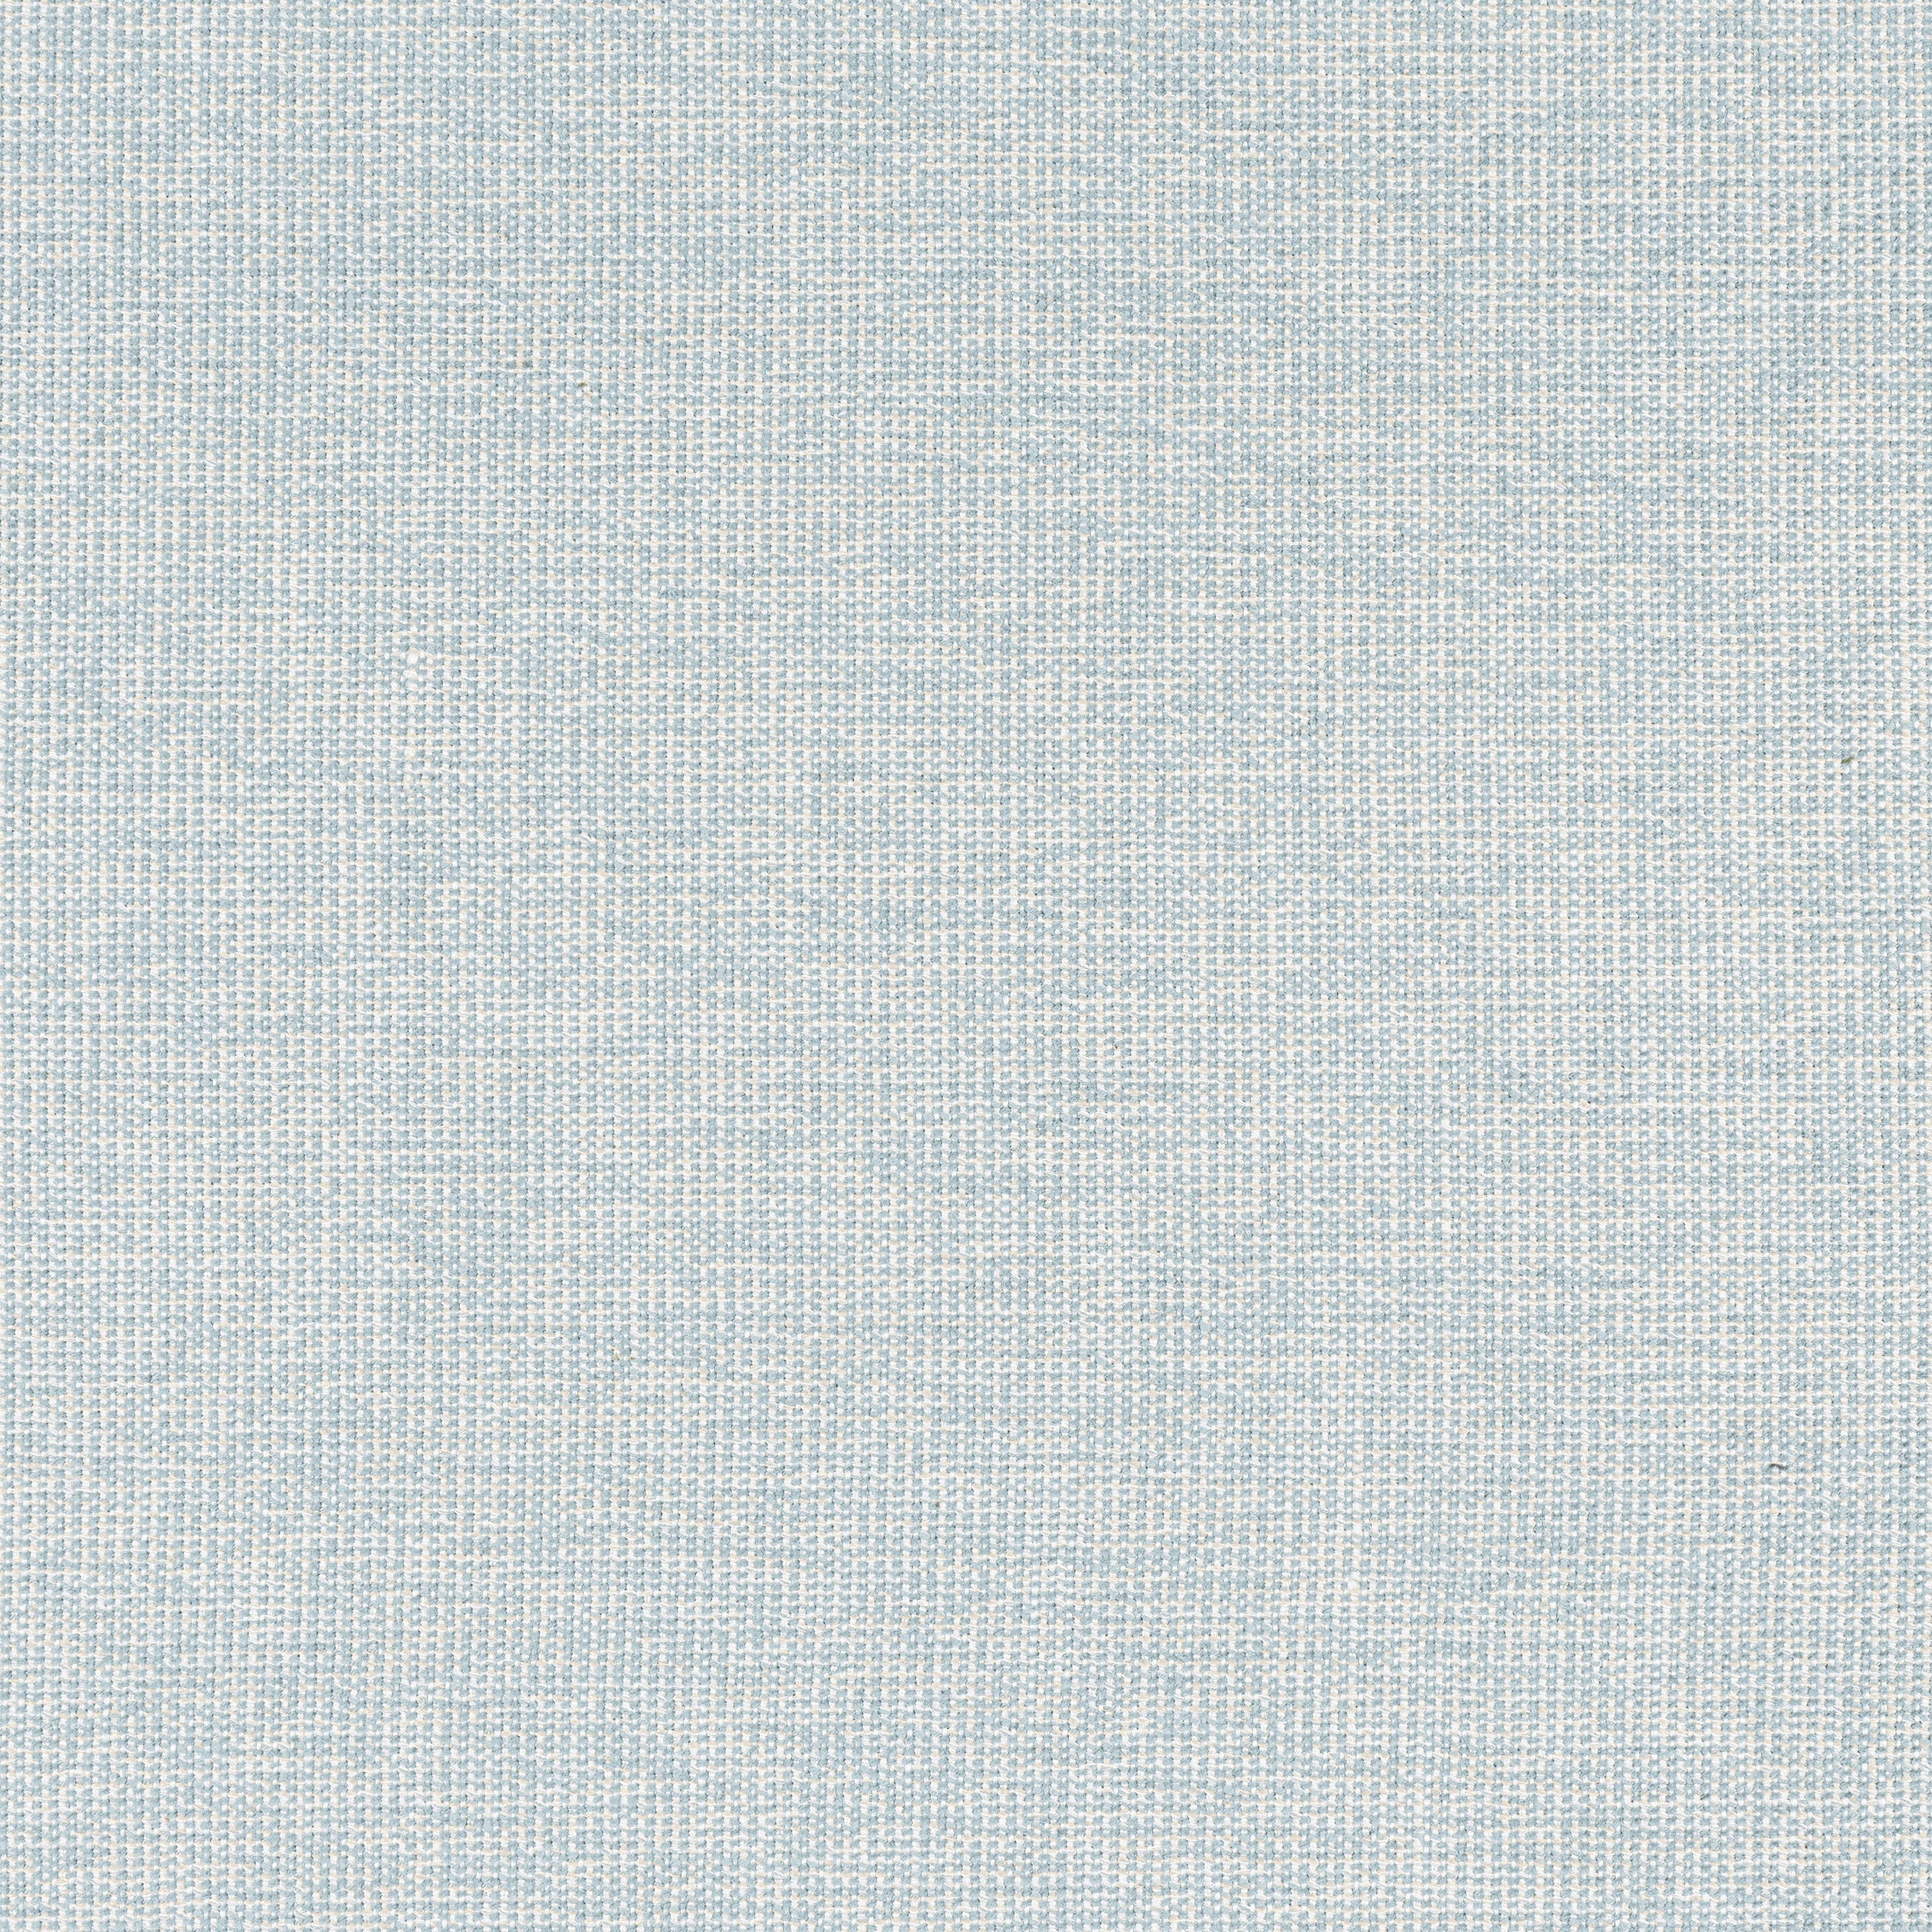 Sacchi fabric in aqua color - pattern number W8764 - by Thibaut in the Haven Textures collection